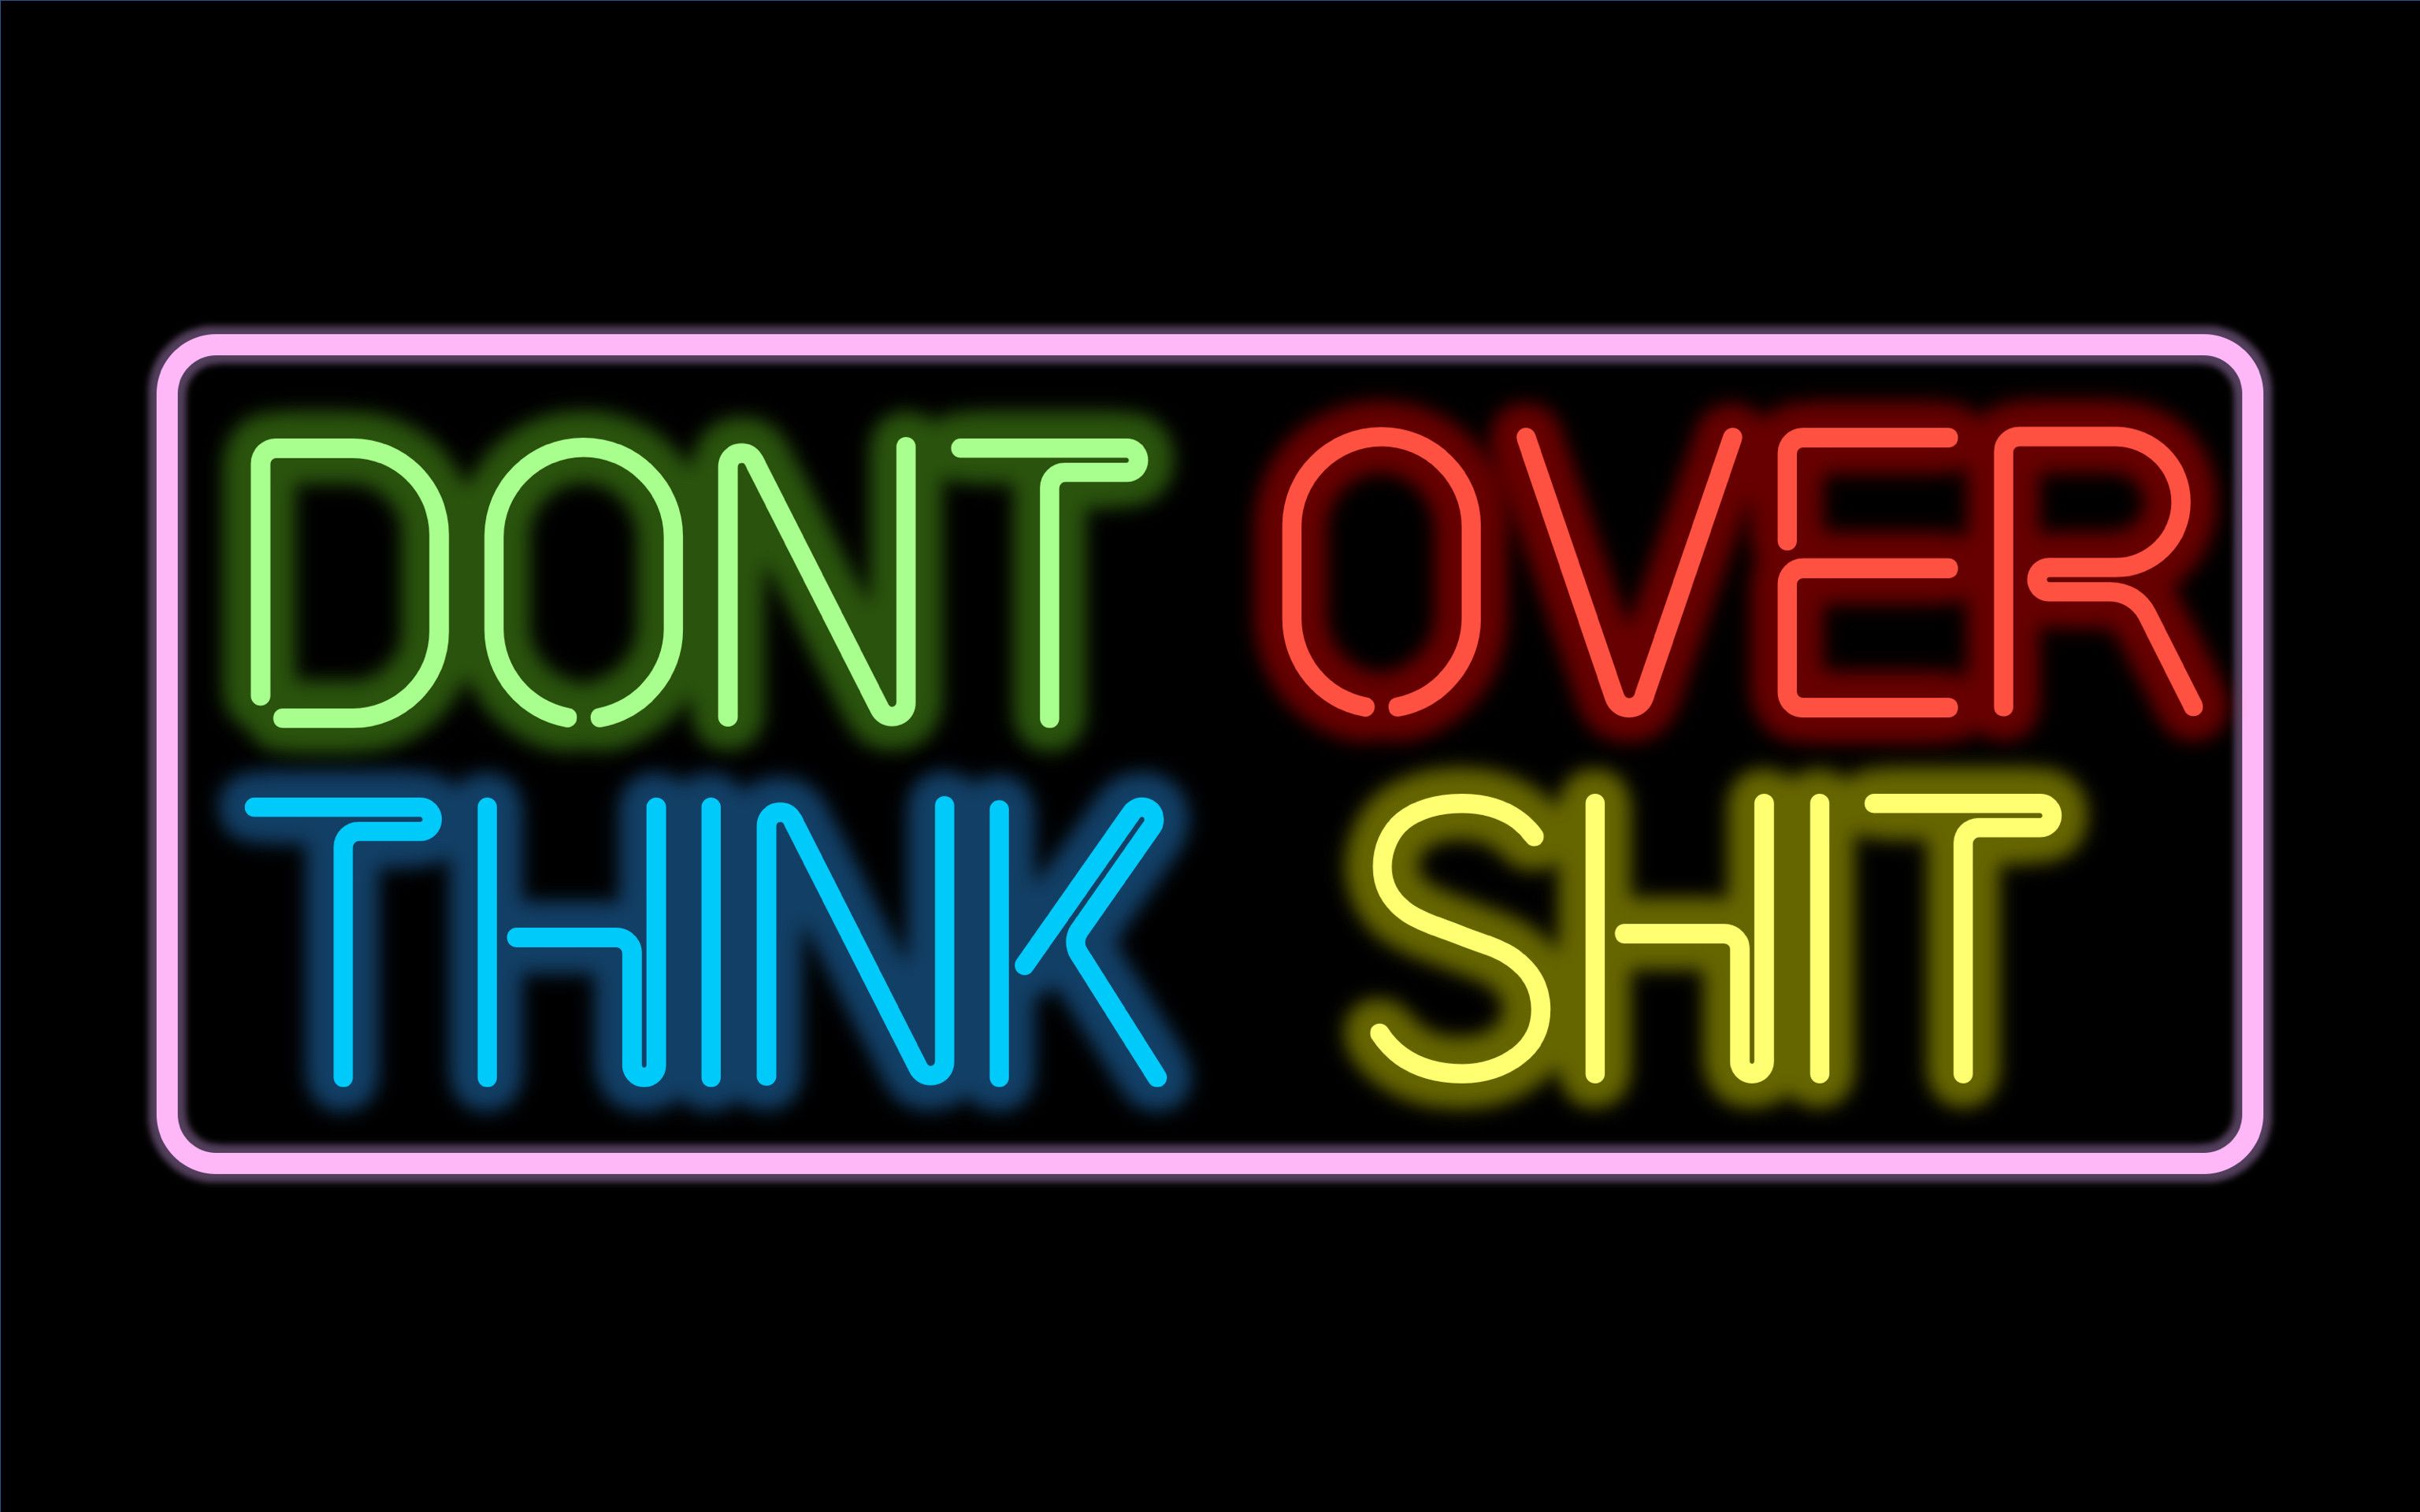 Kenny Beats' The Cave neon sign “DON'T OVER THINK SHIT” 3200x2000